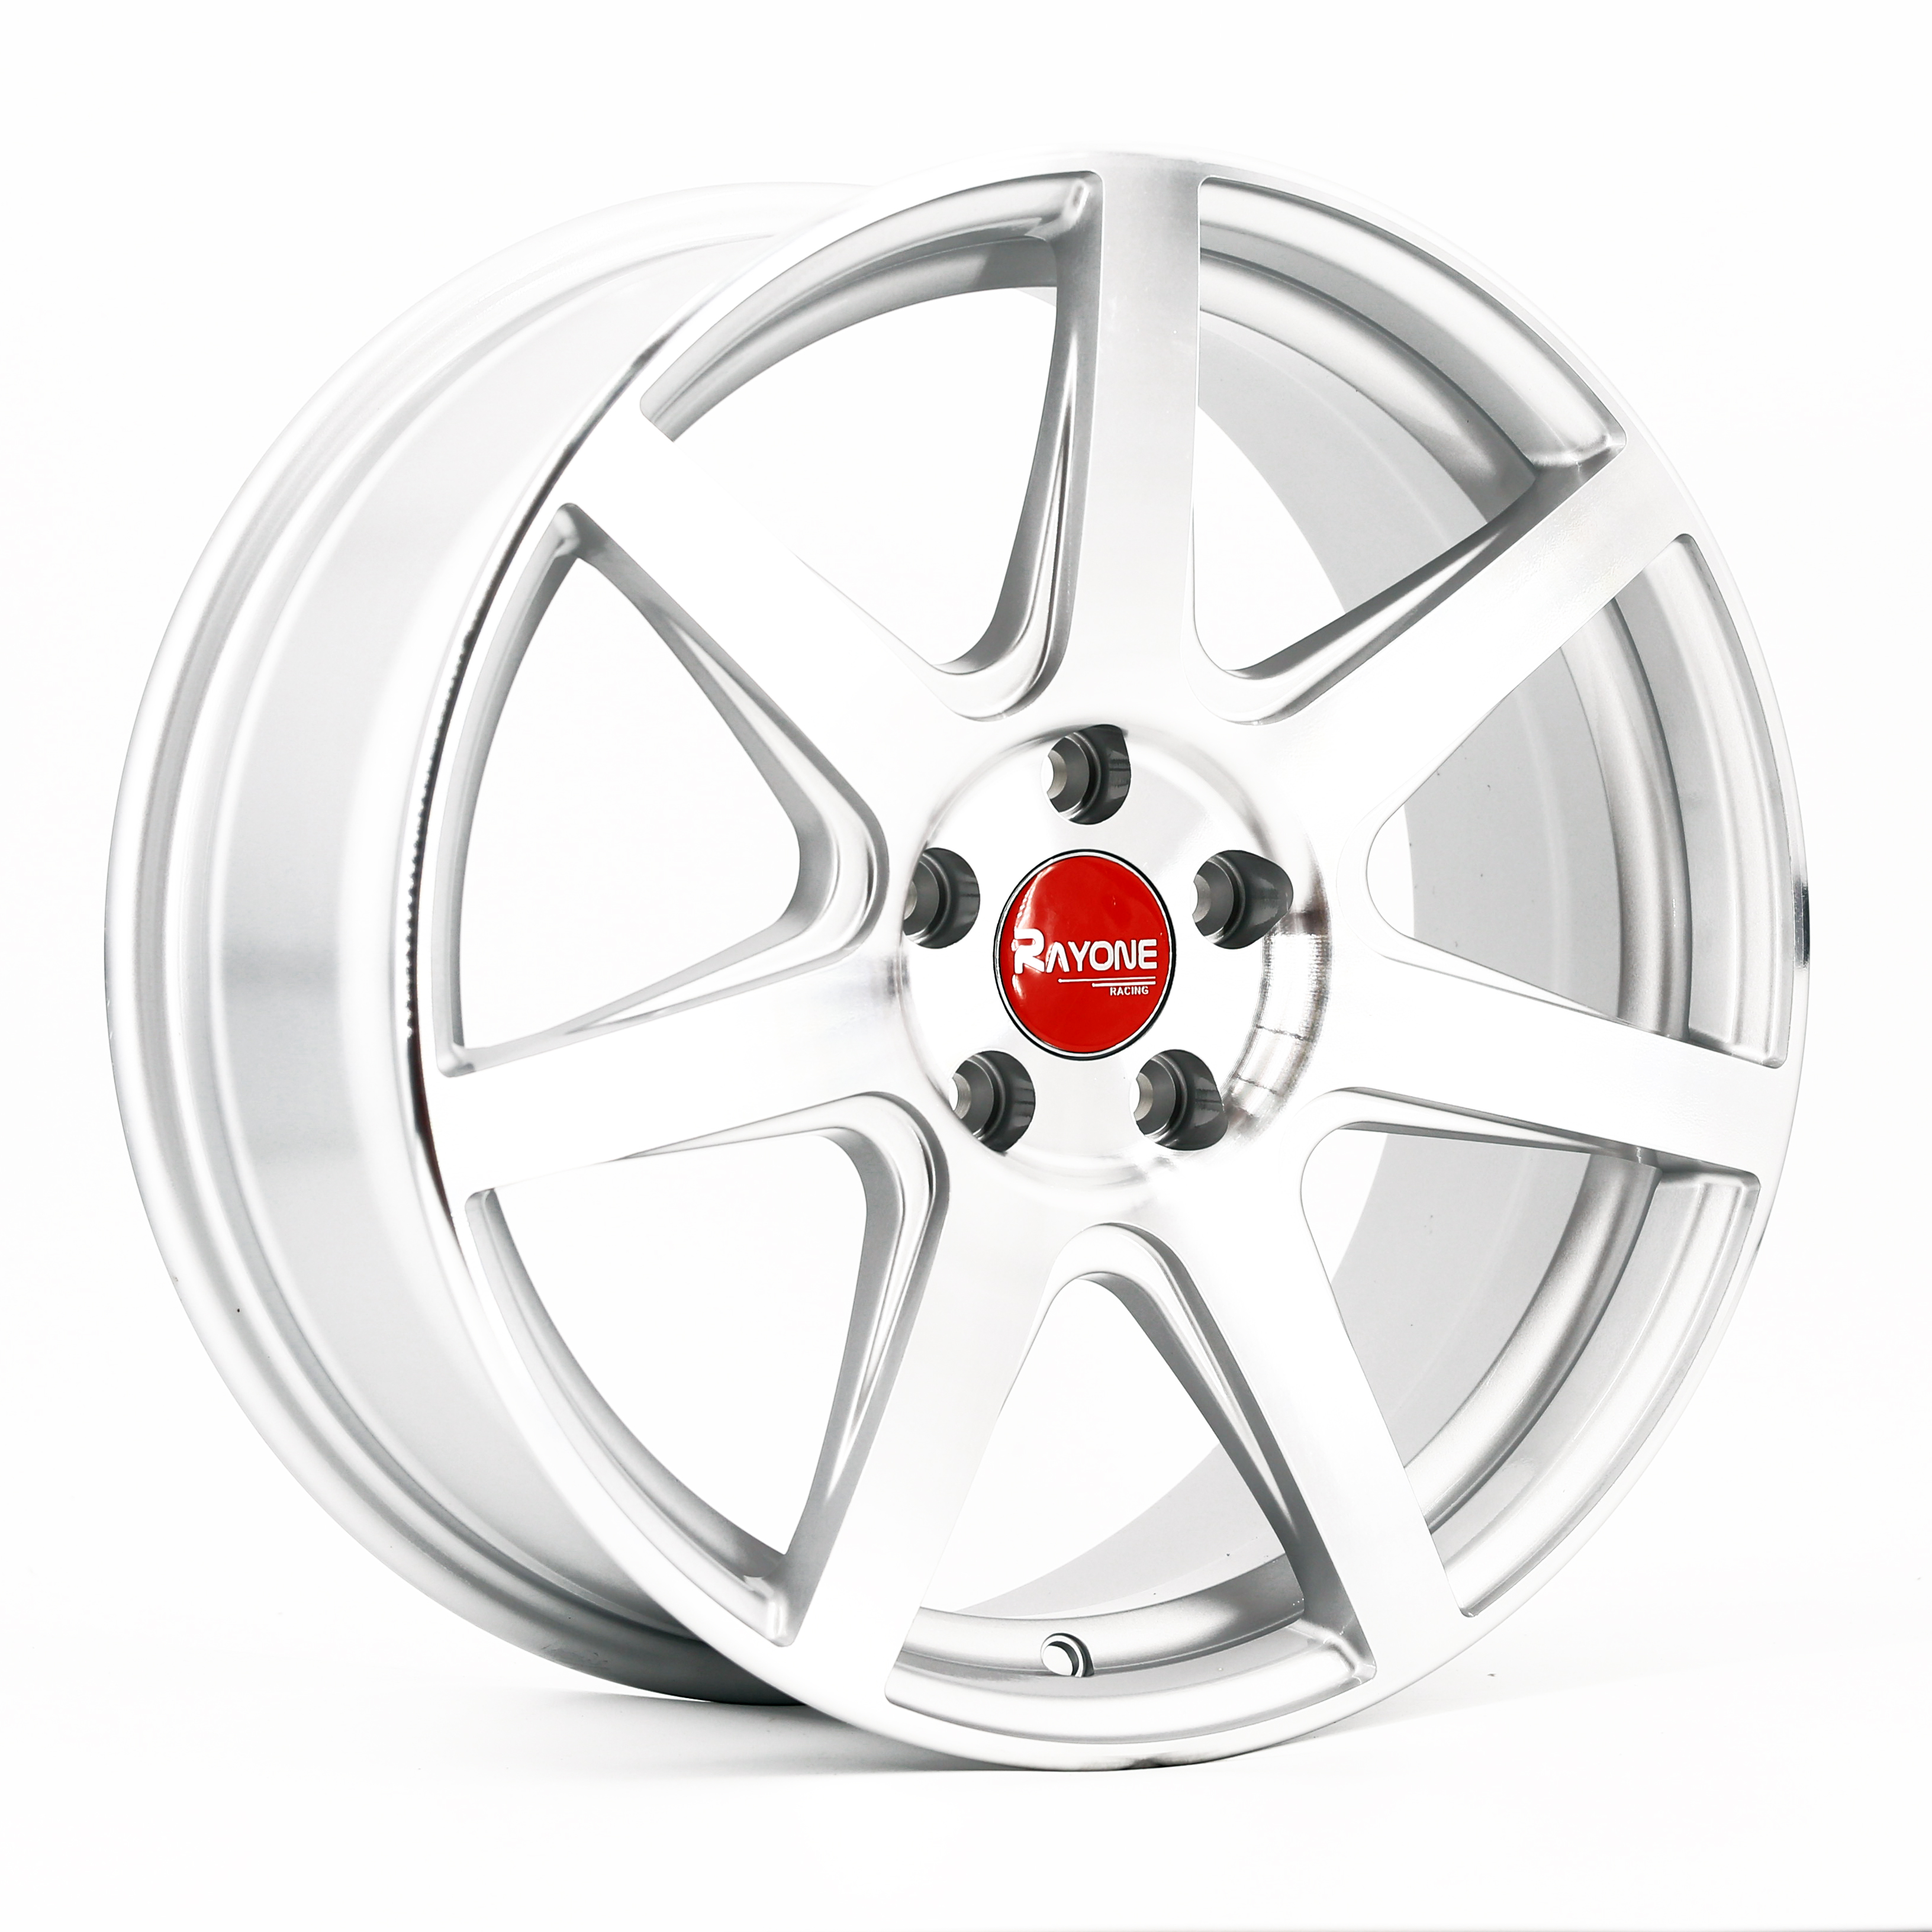 Hot New Products 18 Inch Alloy Rims - Rayone New Design Seven Spoke 17/18Inch Car Alloy Wheel Rims For Racing Car – Rayone